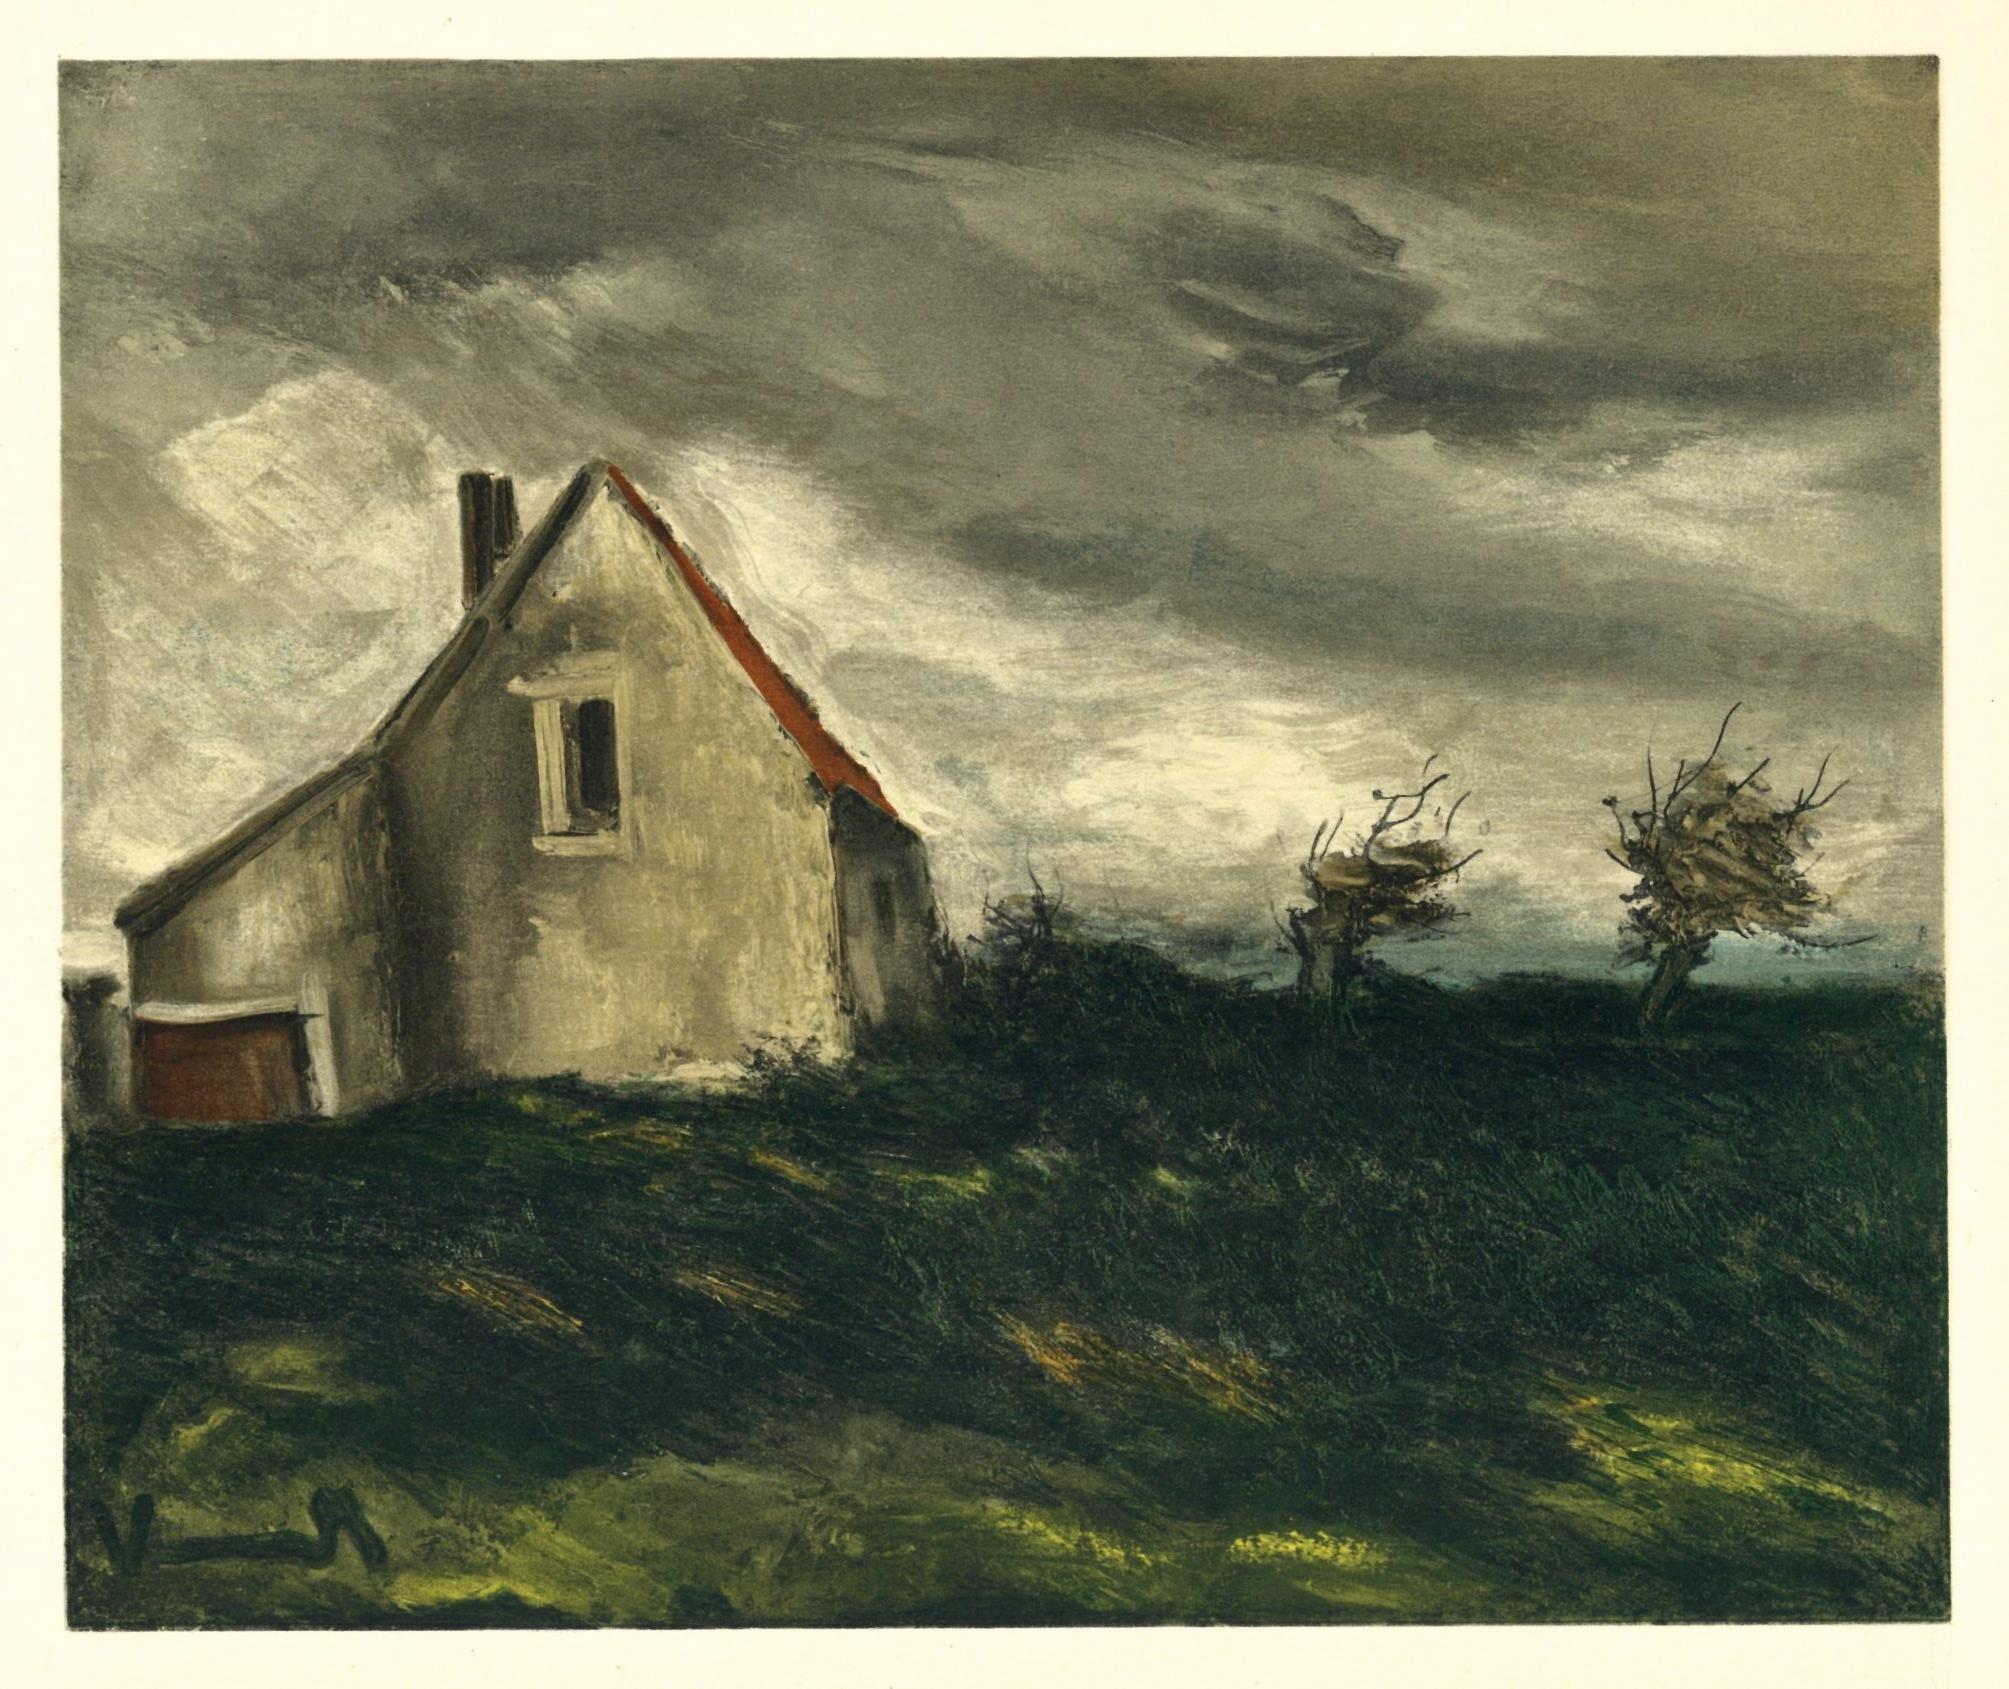 "The House on the Plain" lithograph - Print by (after) Maurice de Vlaminck